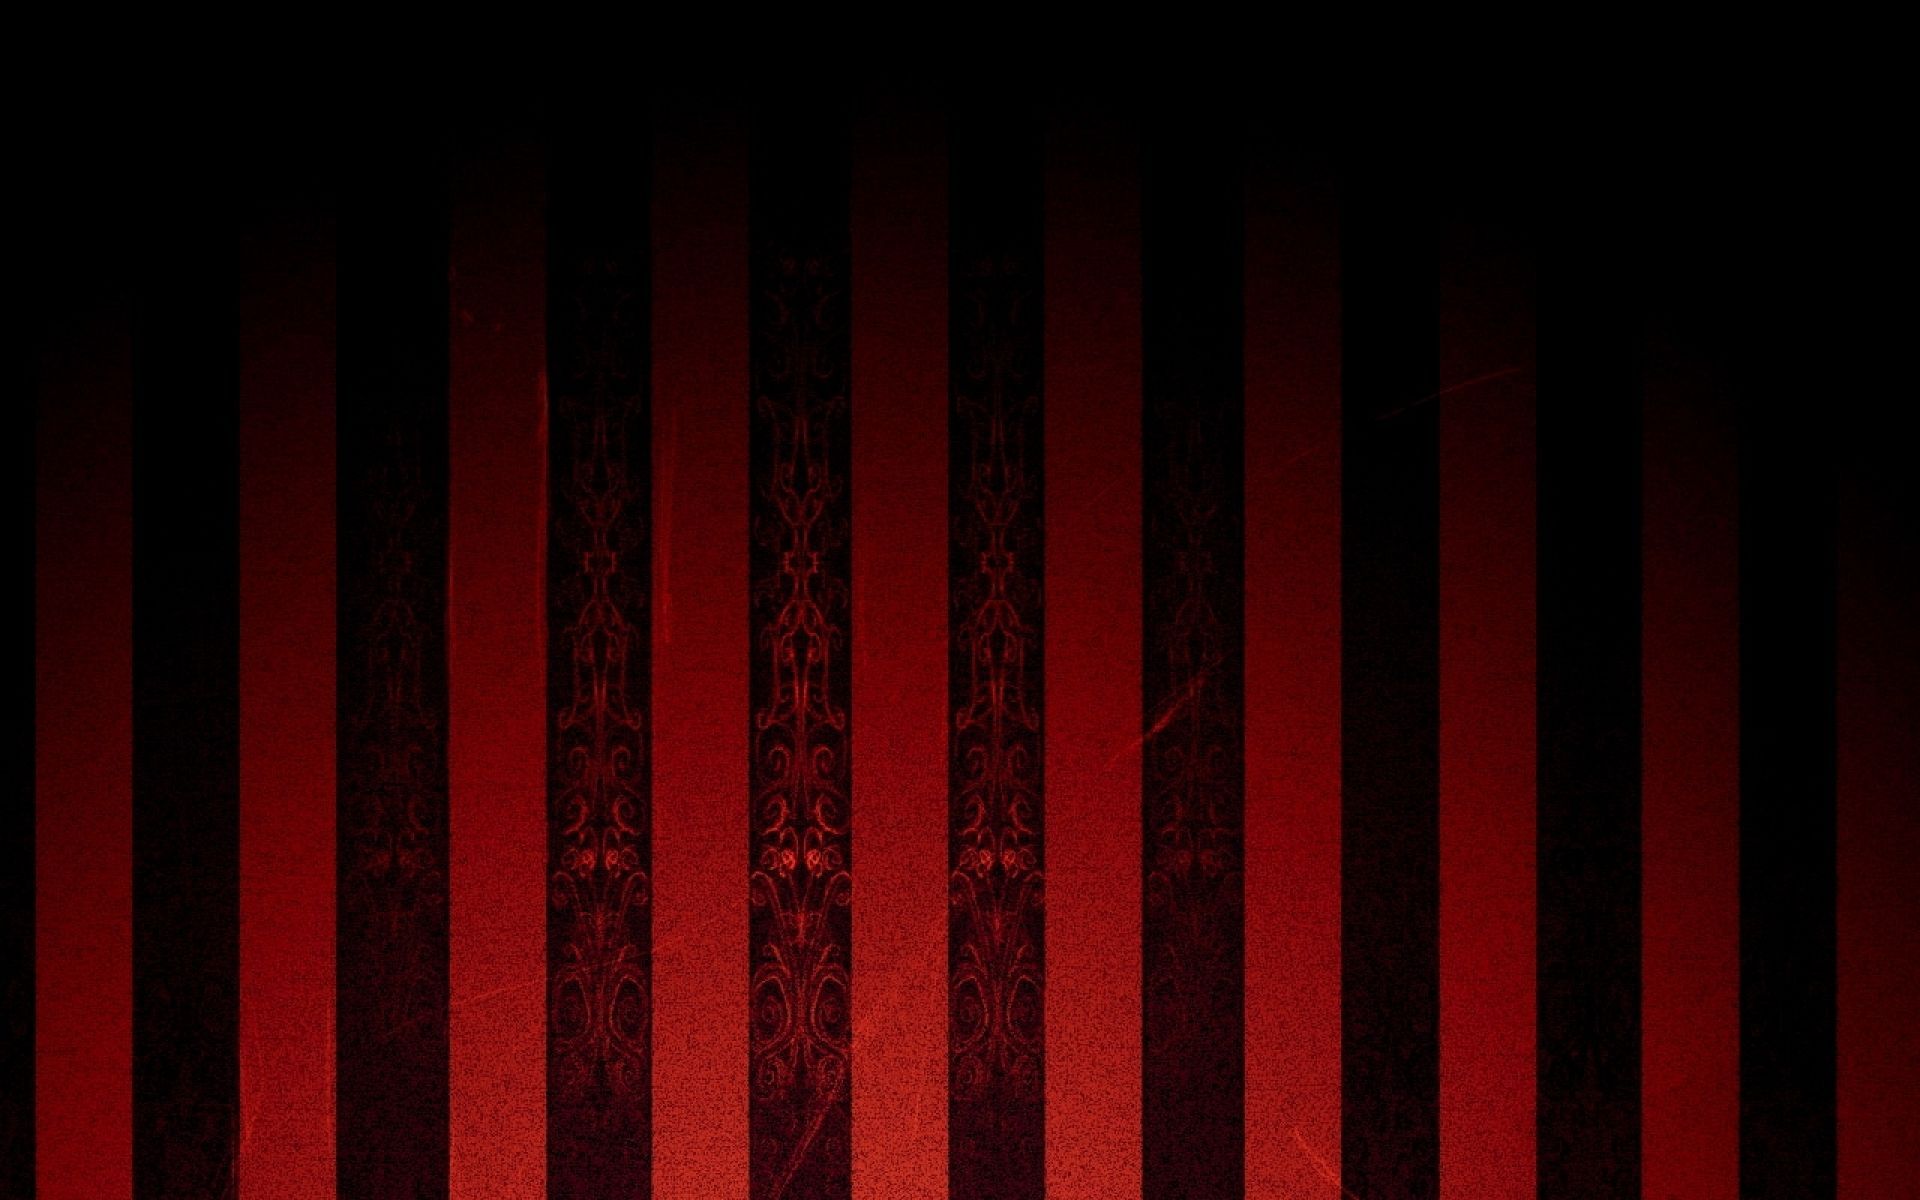 Black And Red Wallpapers HD - Wallpaper Cave